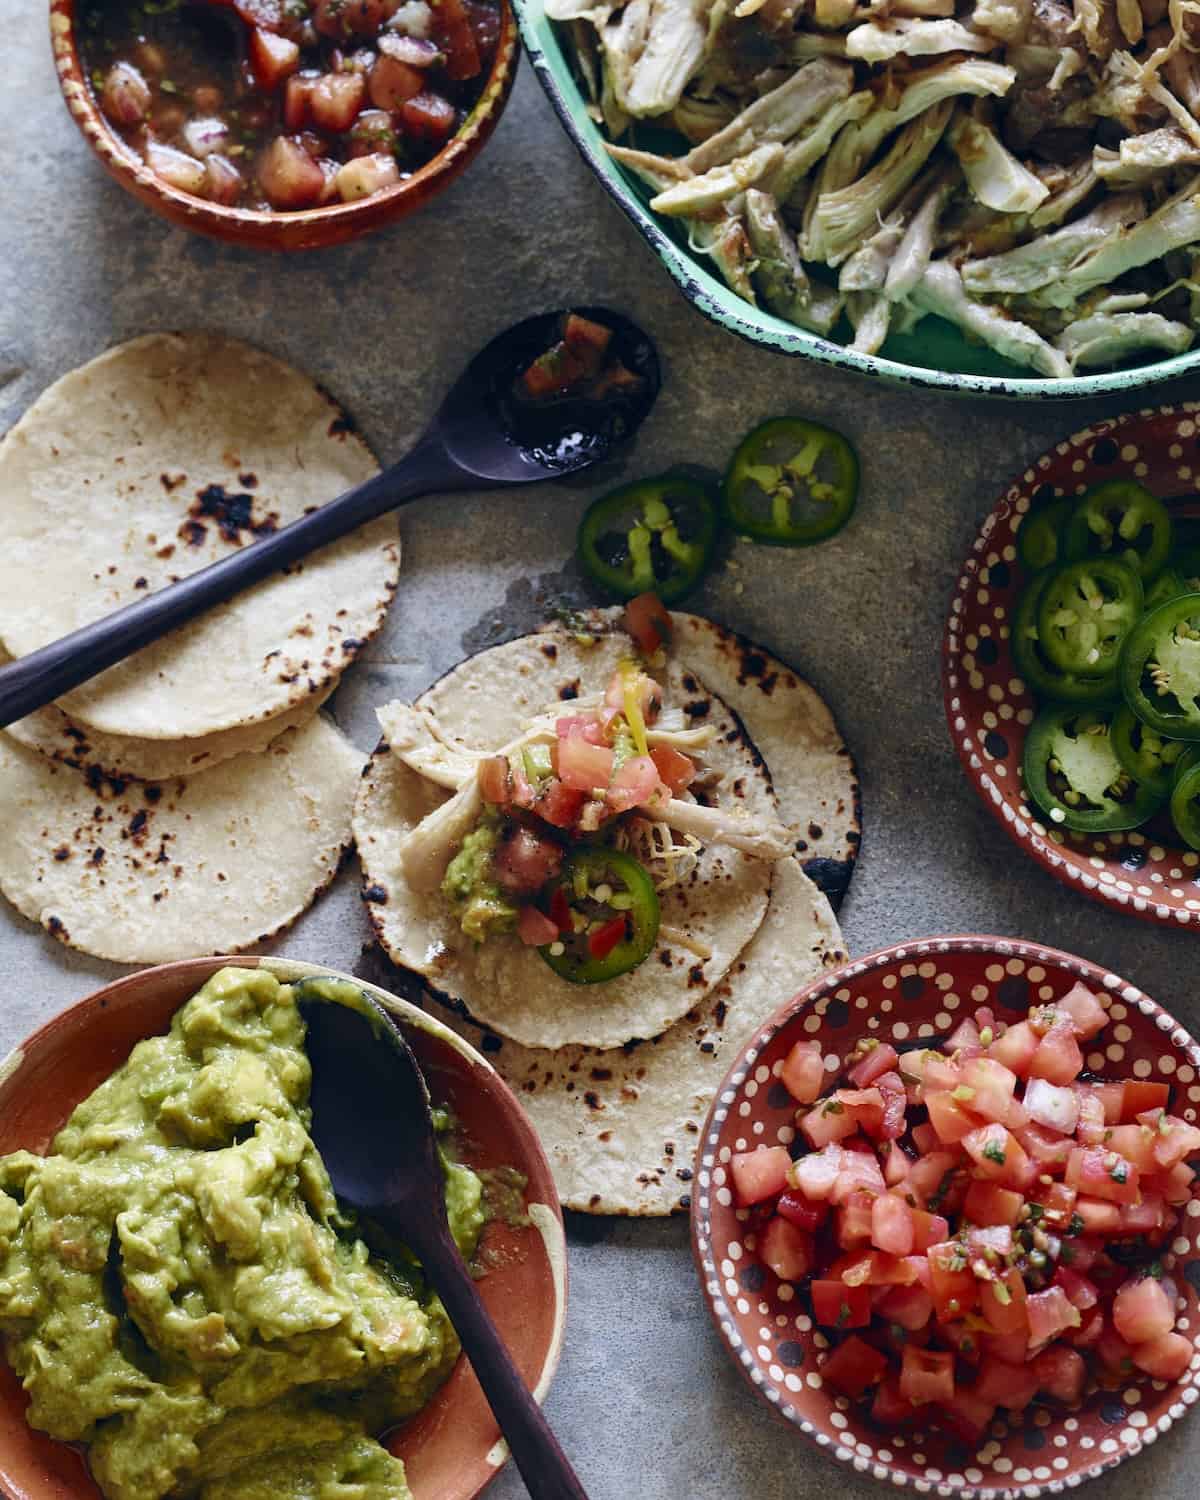 A collection of small bowls with chopped tomatoes, guacamole, sliced jalapeños and a bigger bowl with shredded chicken verde, along with tortillas laid out on the counter, and one tortillas assembled with these items as a taco.